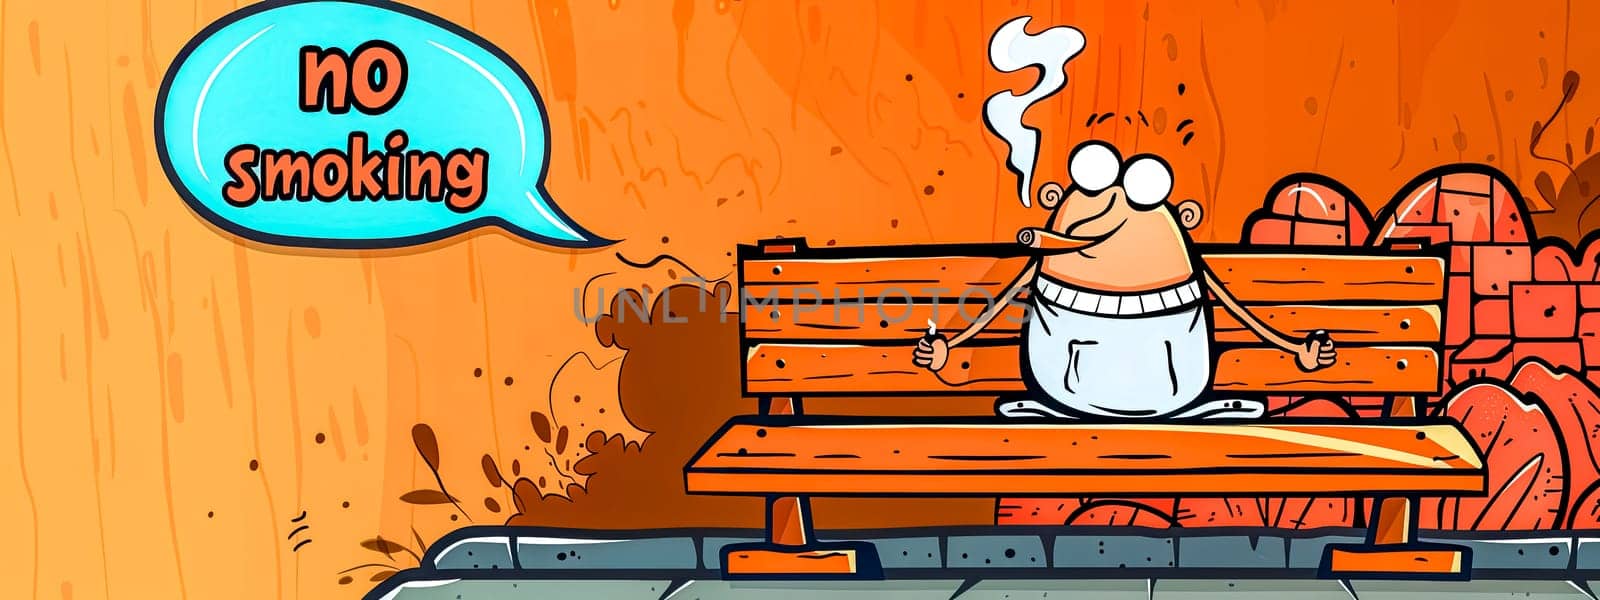 Whimsical illustration of a chef sitting on a bench beside a no smoking pop-art bubble